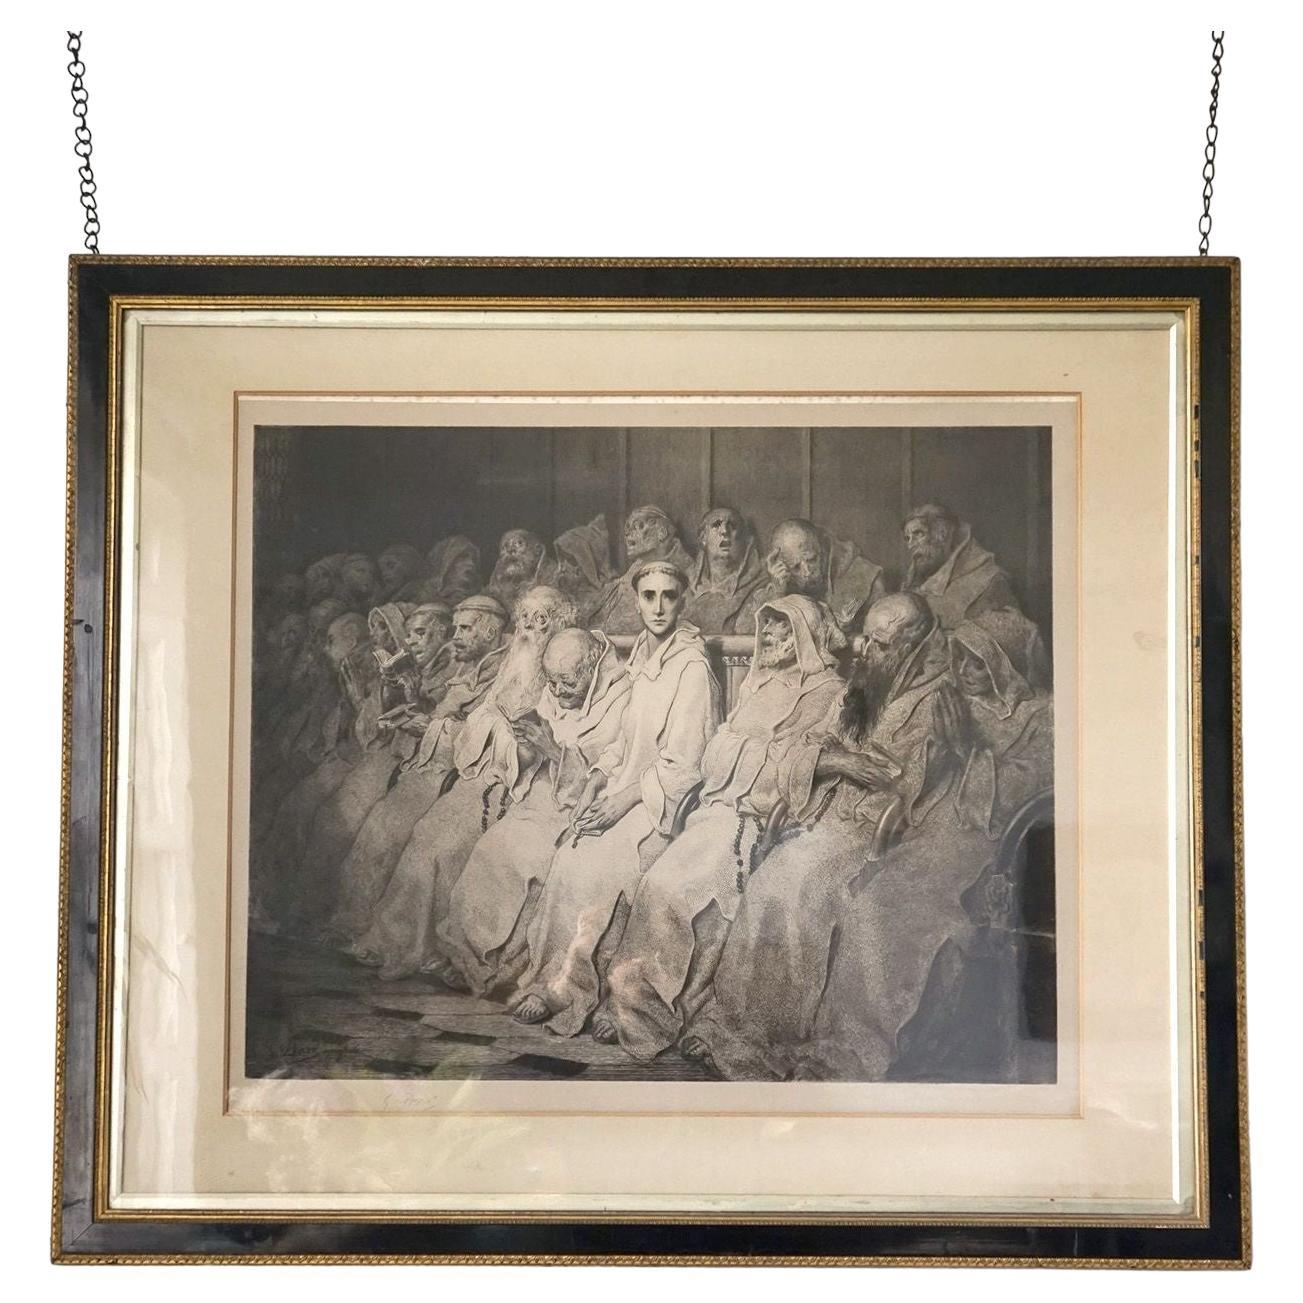 'The Neophyte', Large Signed Antique Etching by Gustave Doré, 19th Century